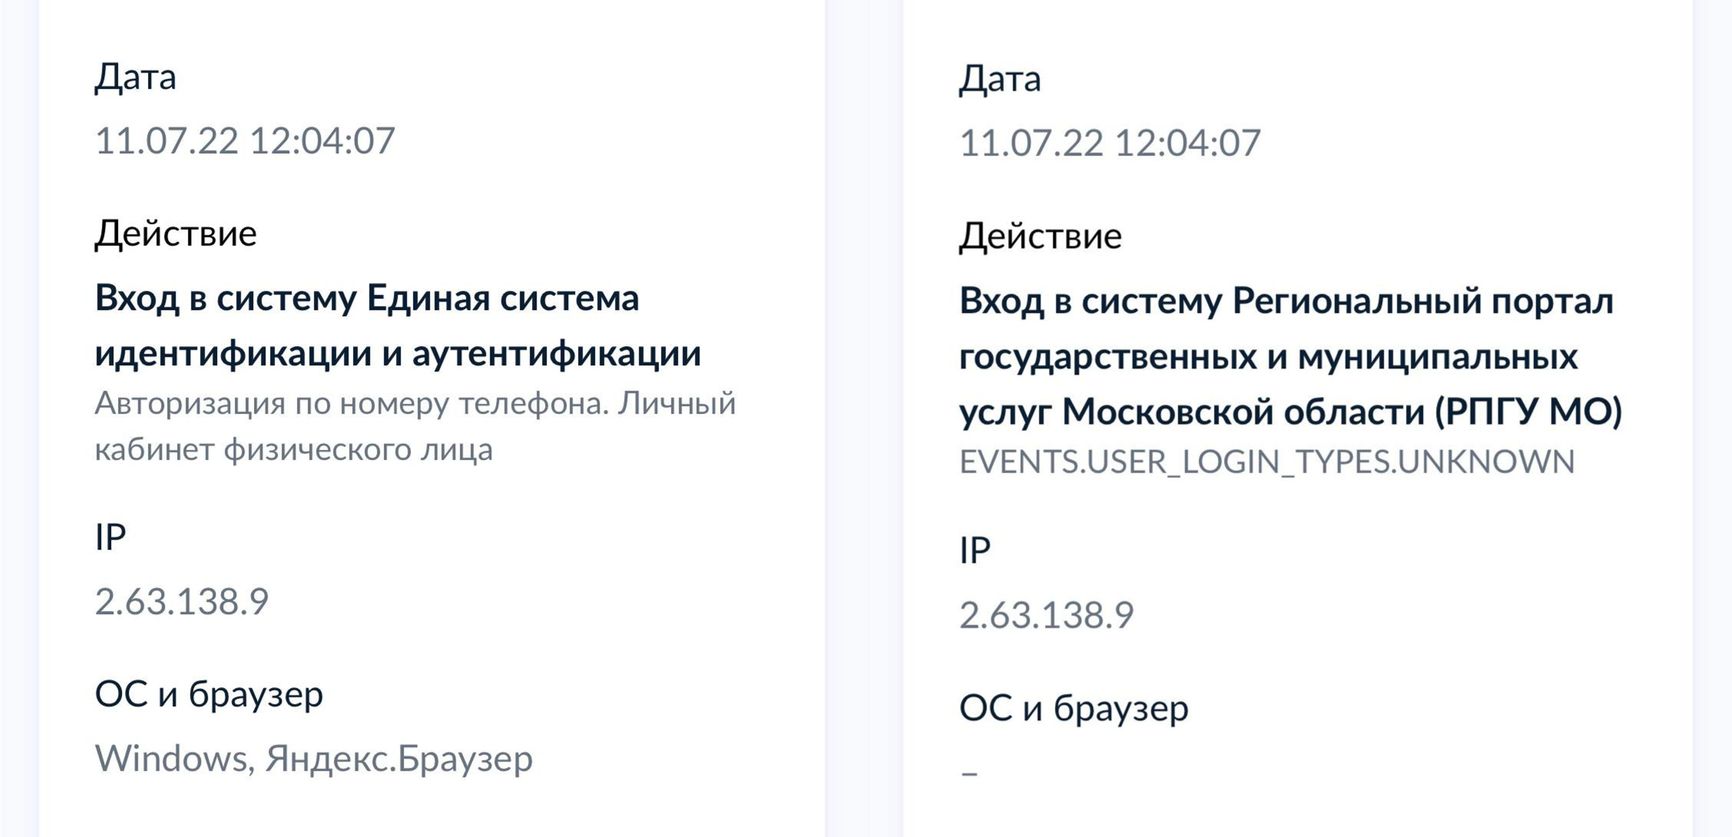 The screenshots above show the IP addresses Krestyaninov’s Gosuslugi account was accessed from